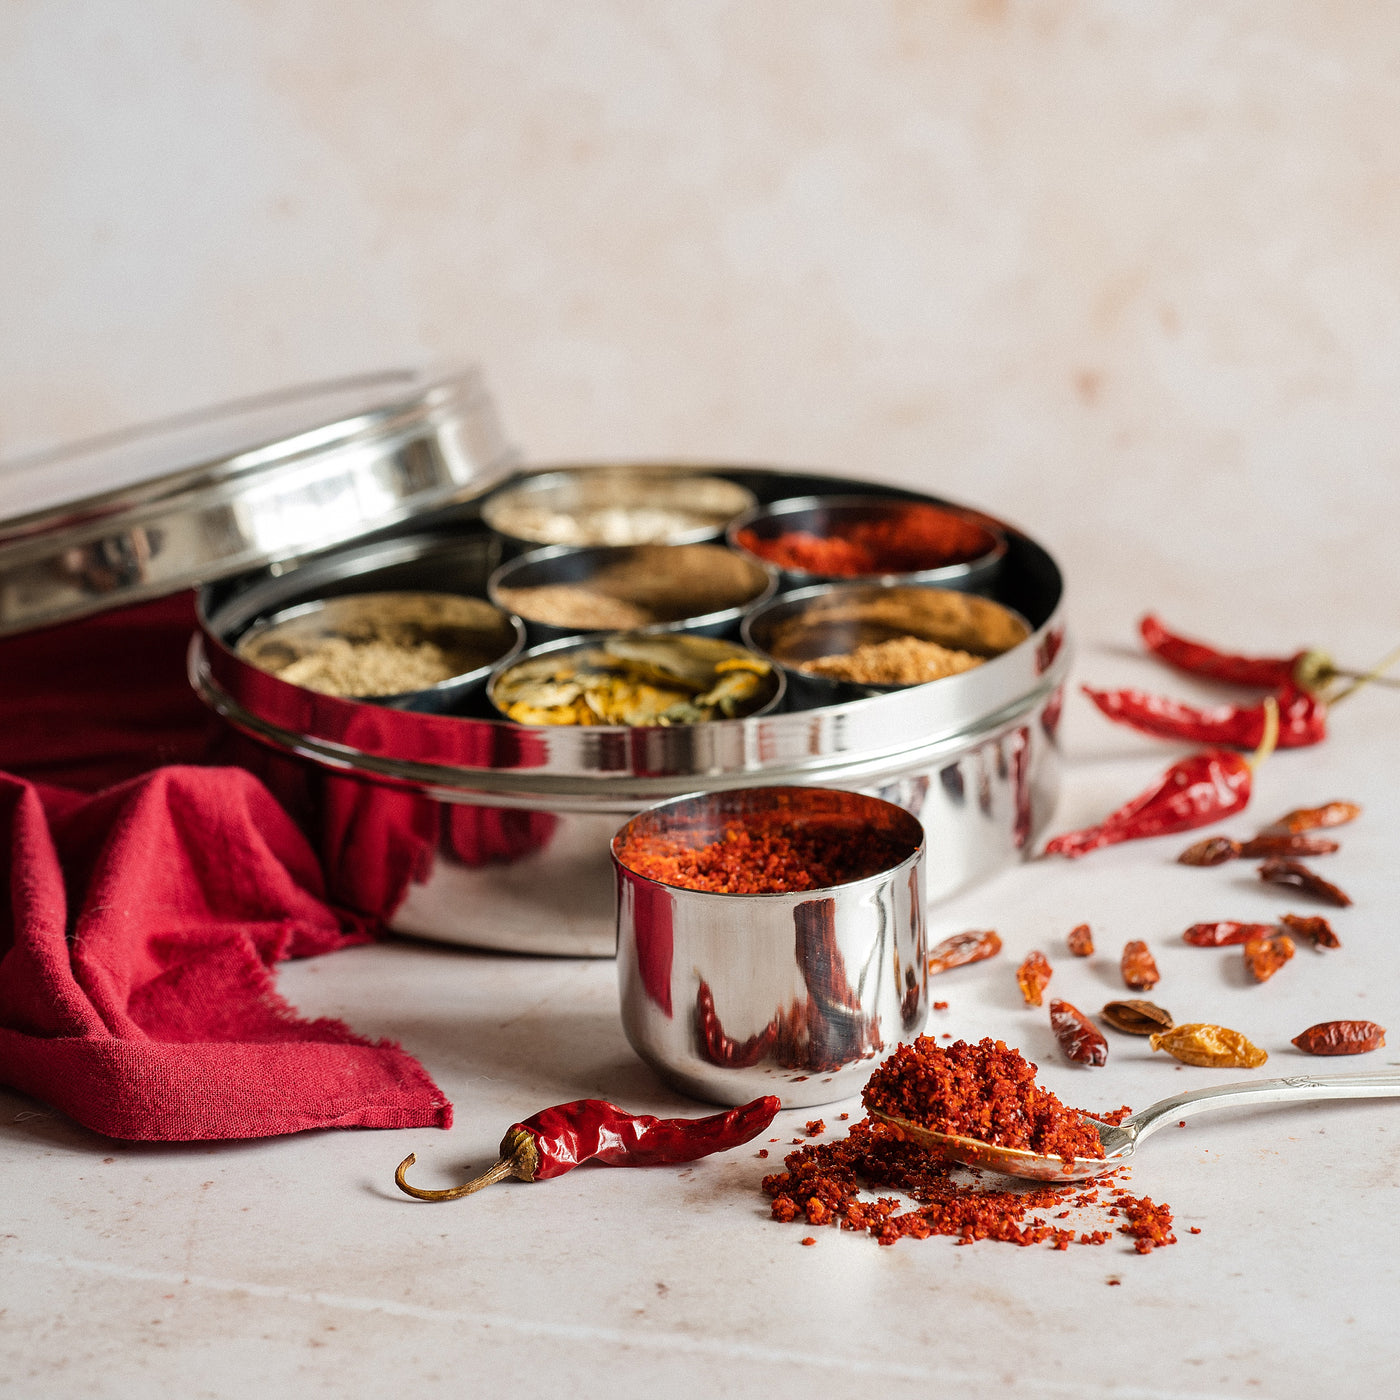 Spice Experience Kit - Complete With Authentic Spice Tin